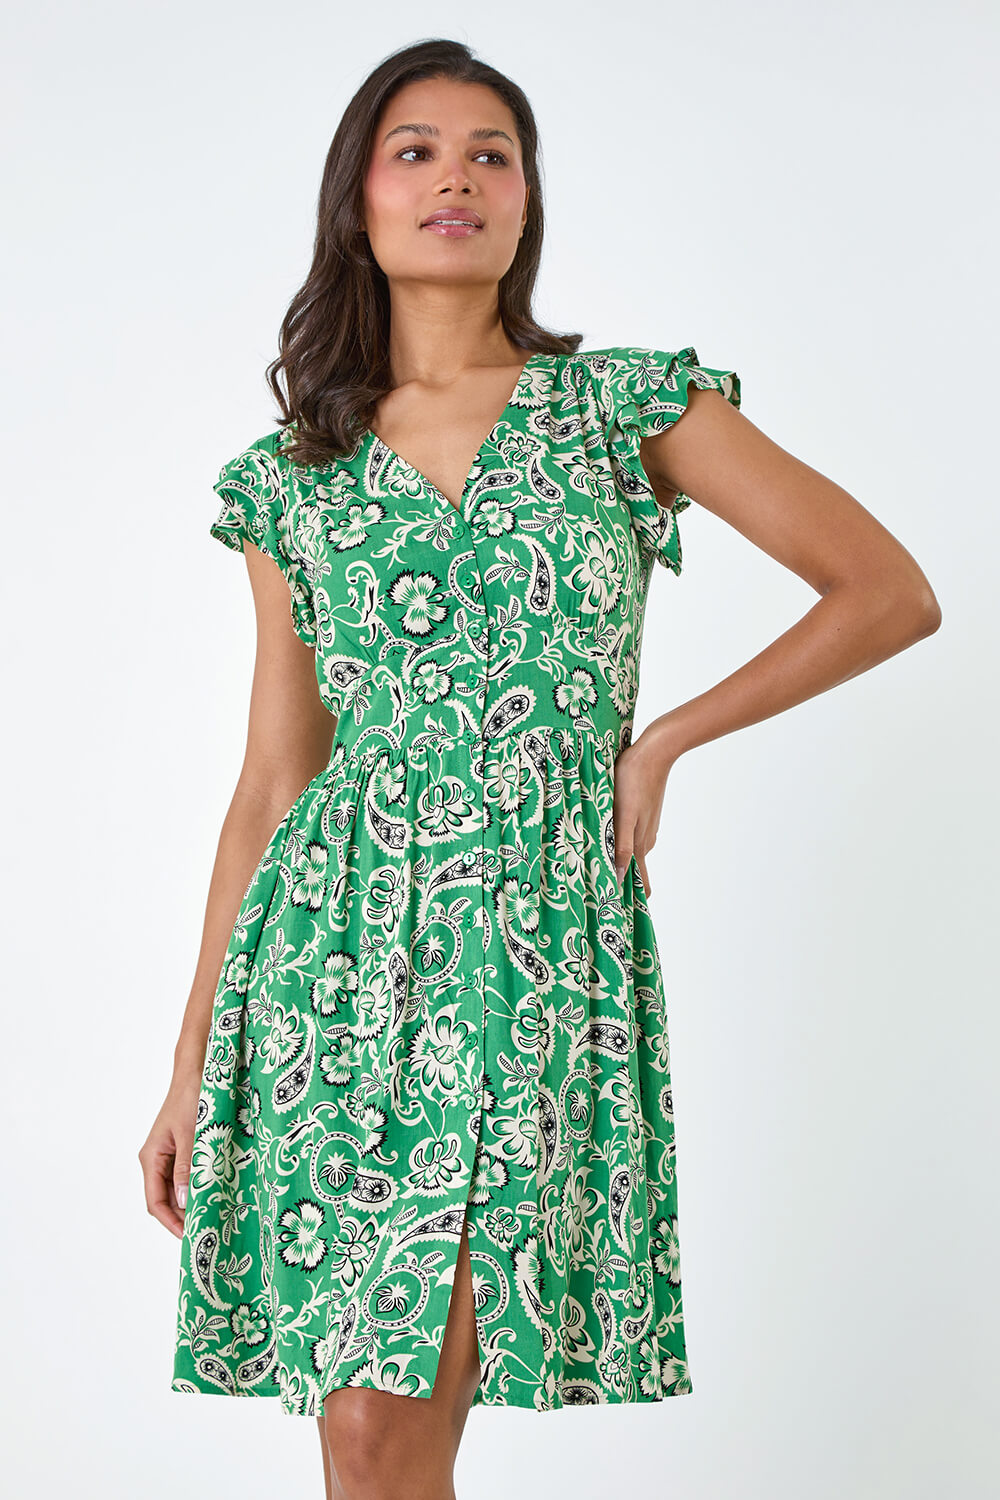 Green Paisley Floral Print Frill Dress, Image 4 of 5